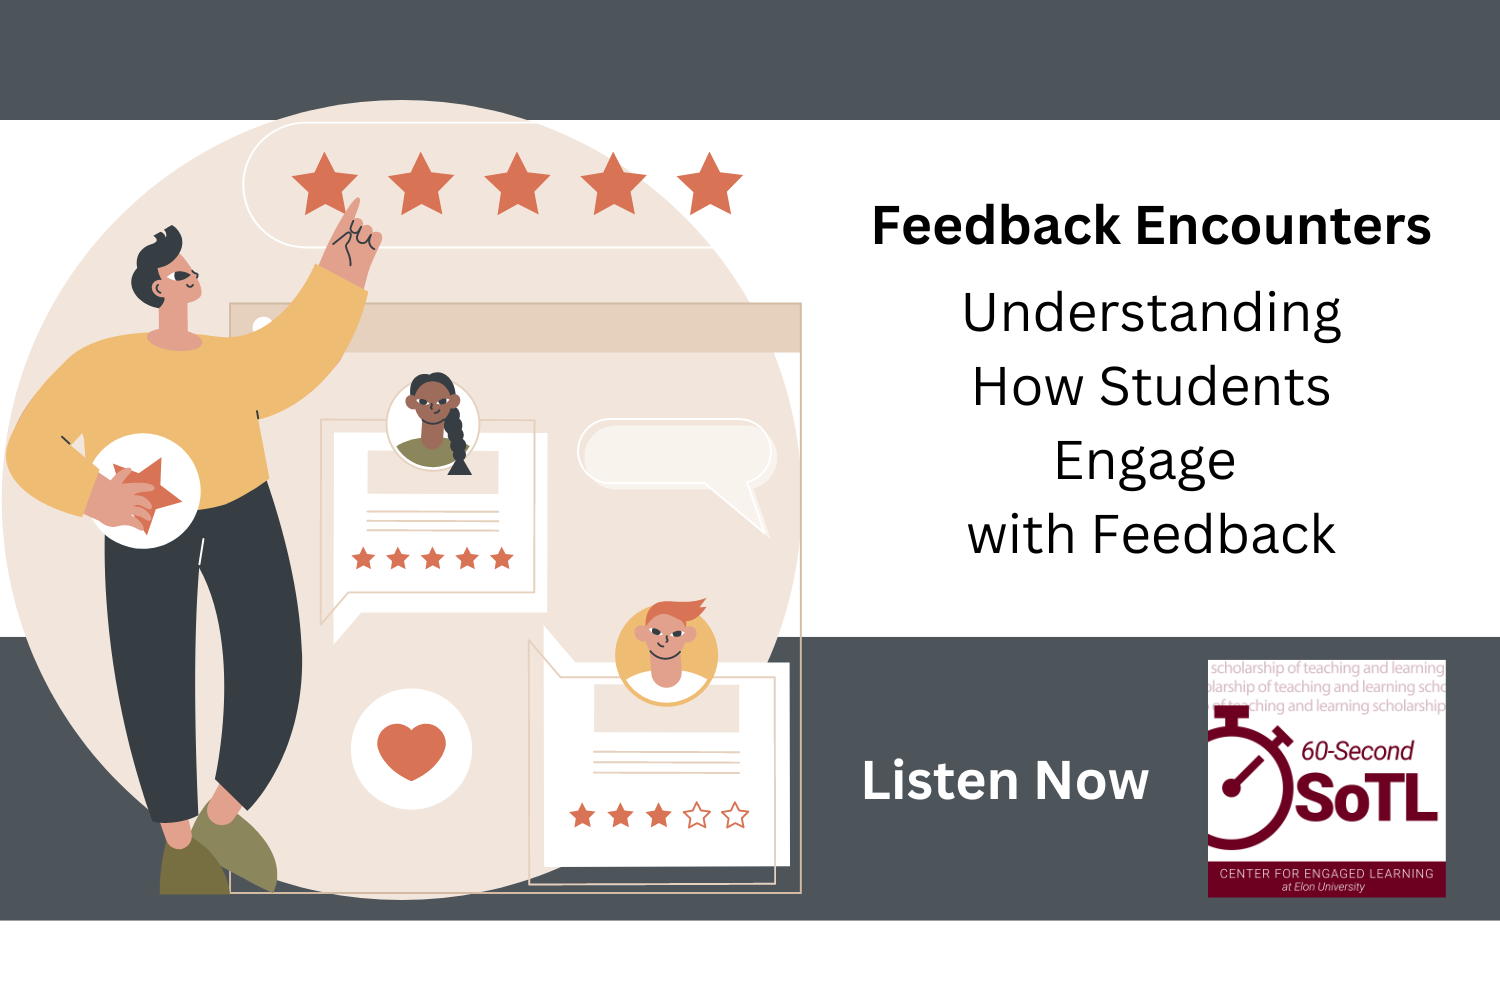 Cartoon image of a person pointing to five stars above cartoon representations of rating or review comments. To the side, text reads: "Feedback encounters: Understanding how students engage with feedback. Listen now."